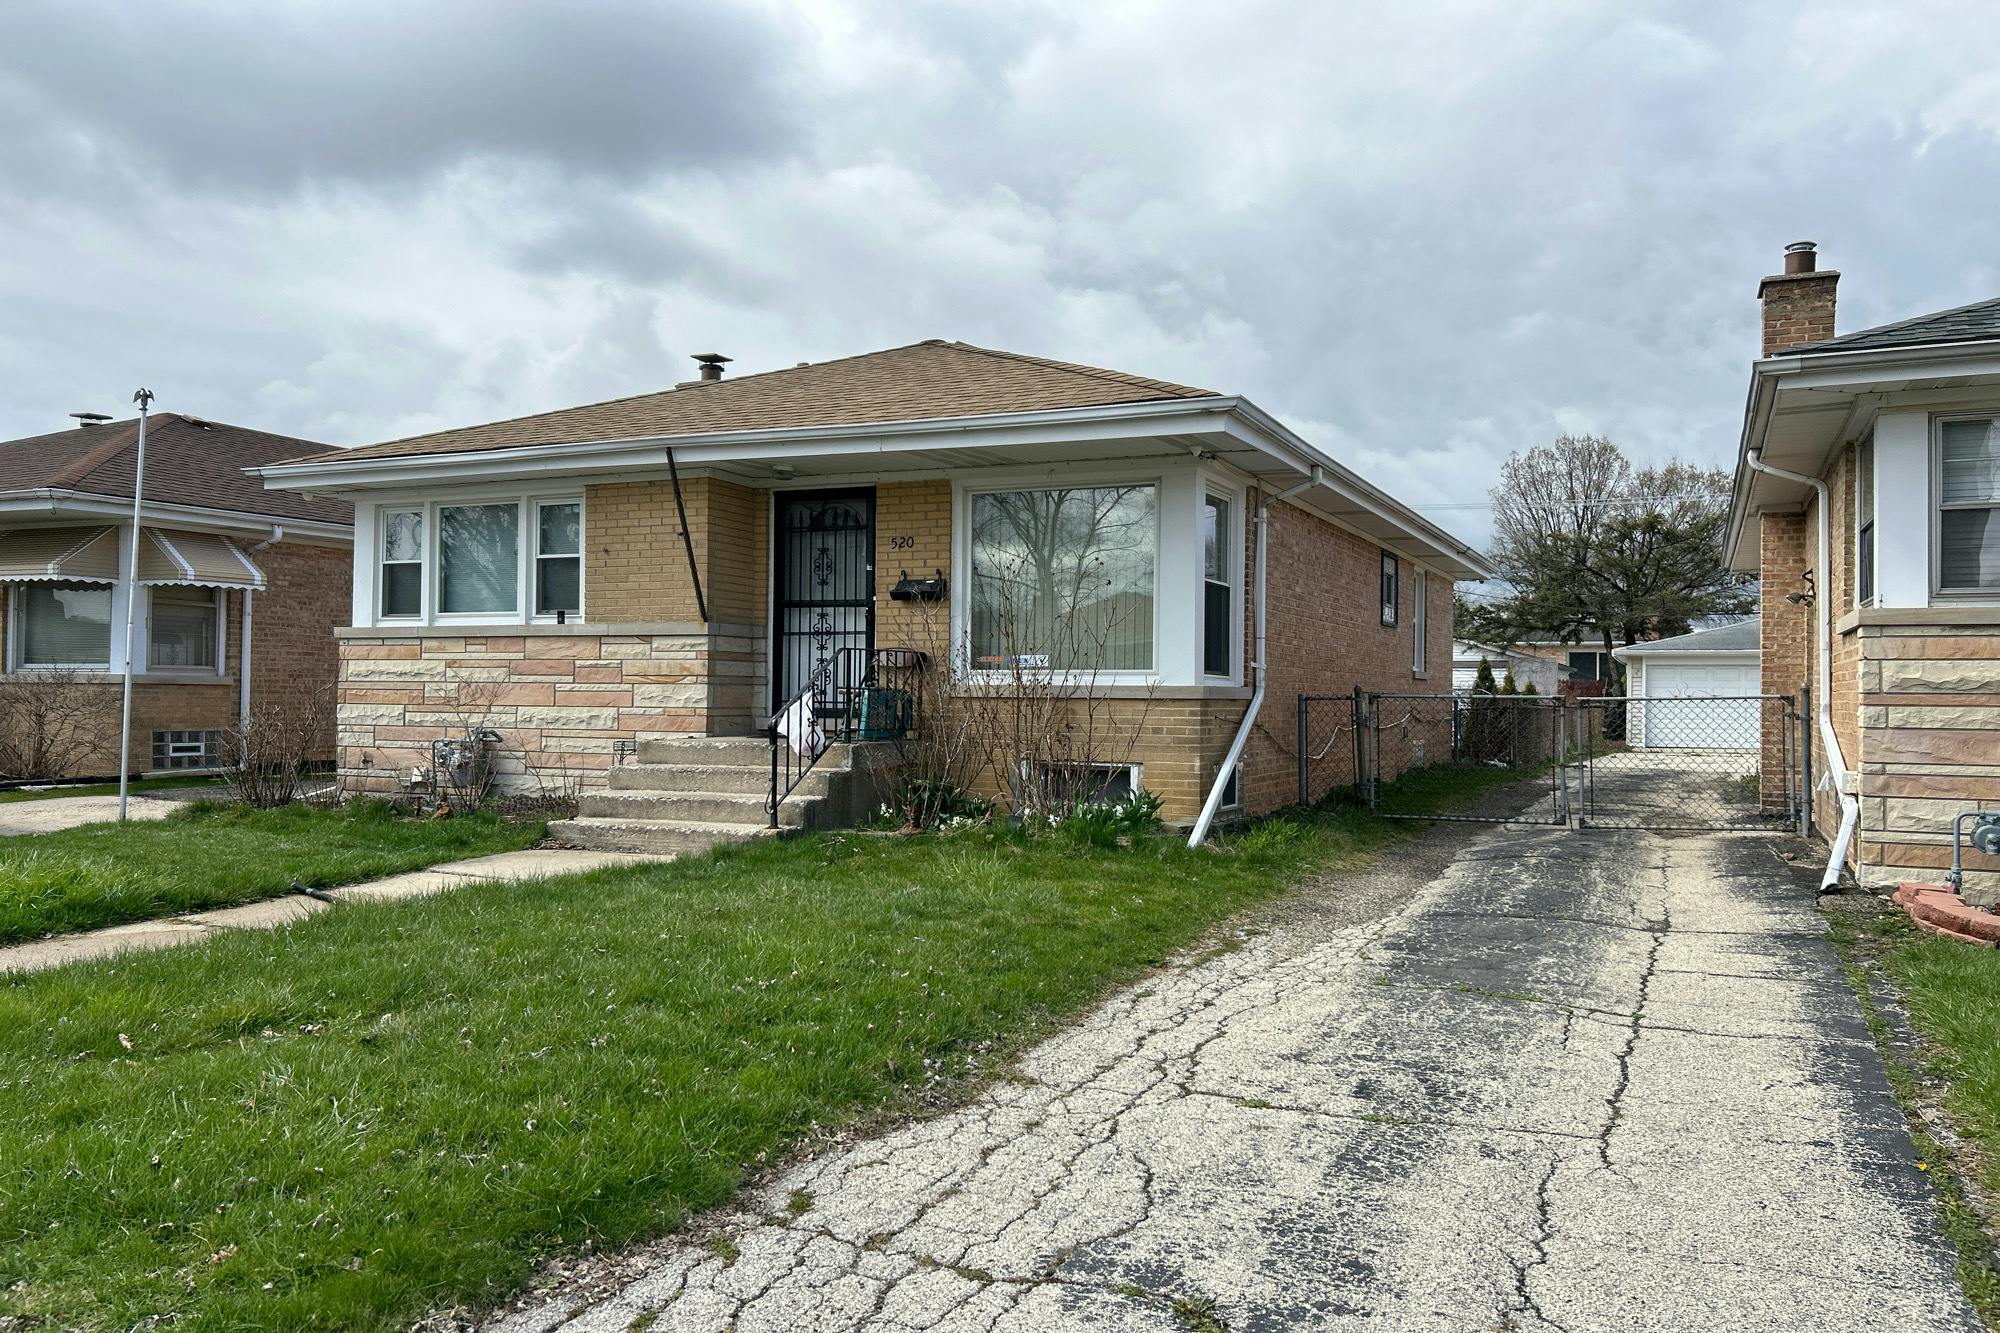 51st Ave, Bellwood, IL 60104 #1